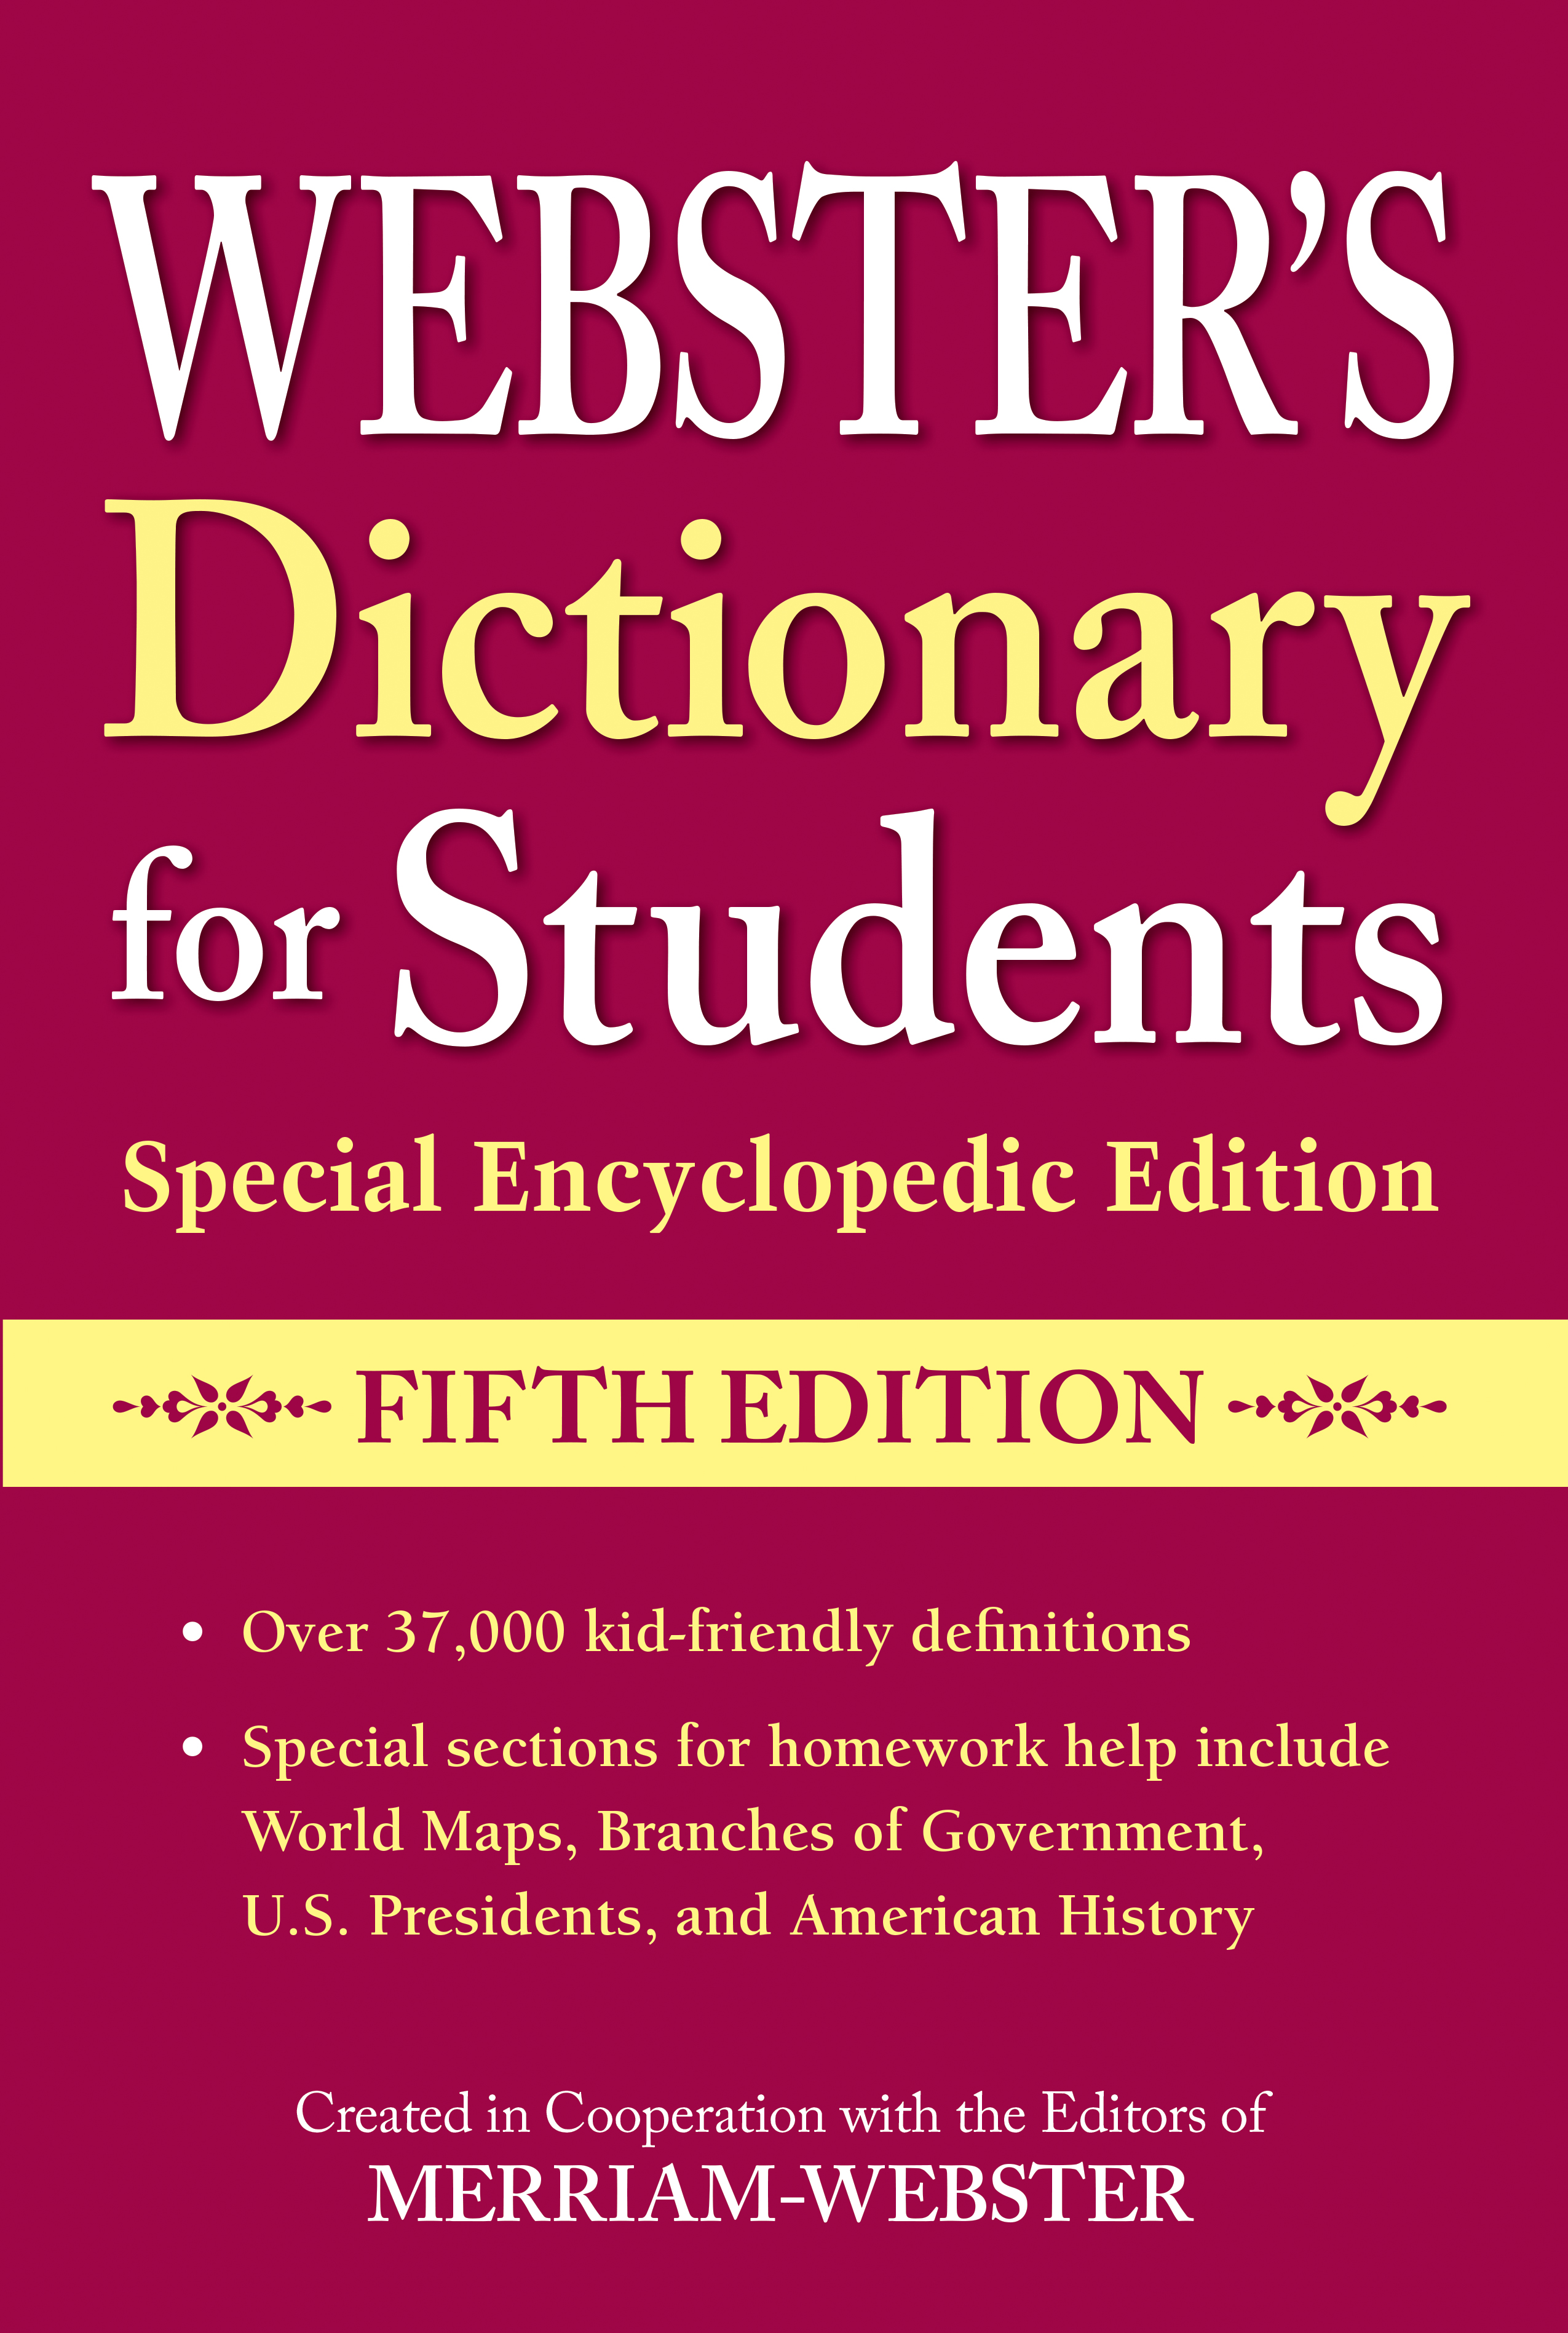 webster's dictionary for students, special encyclopedic edition